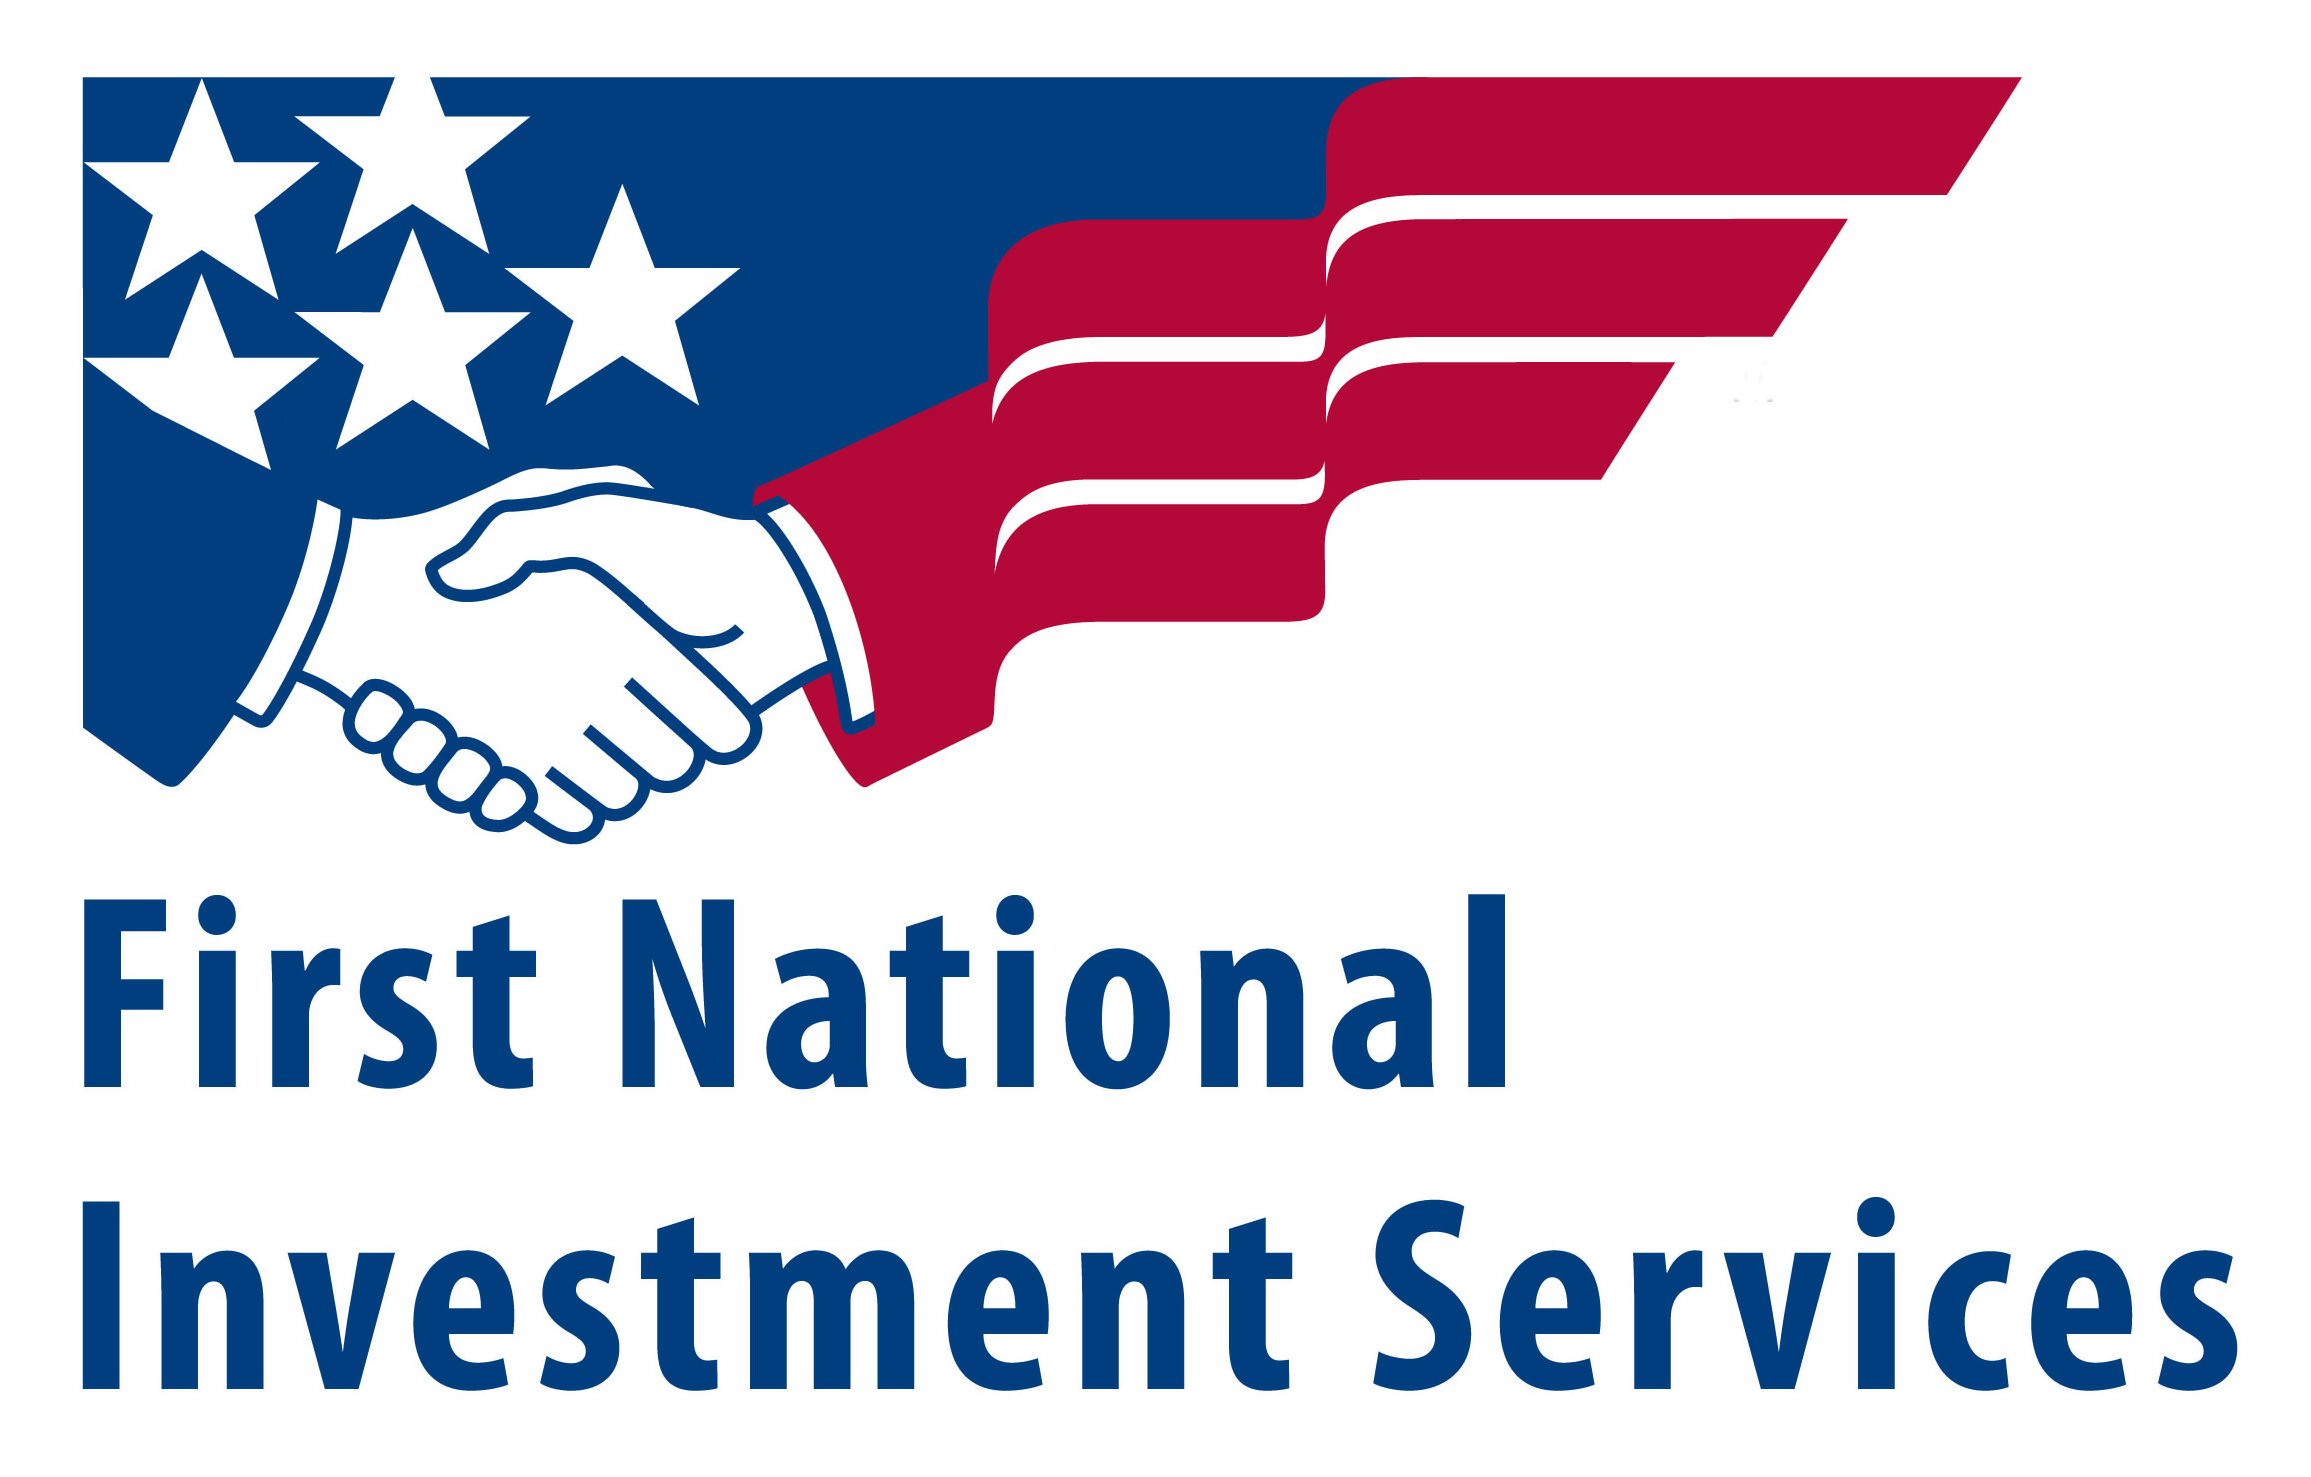  FIRST NATIONAL INVESTMENT SERVICES